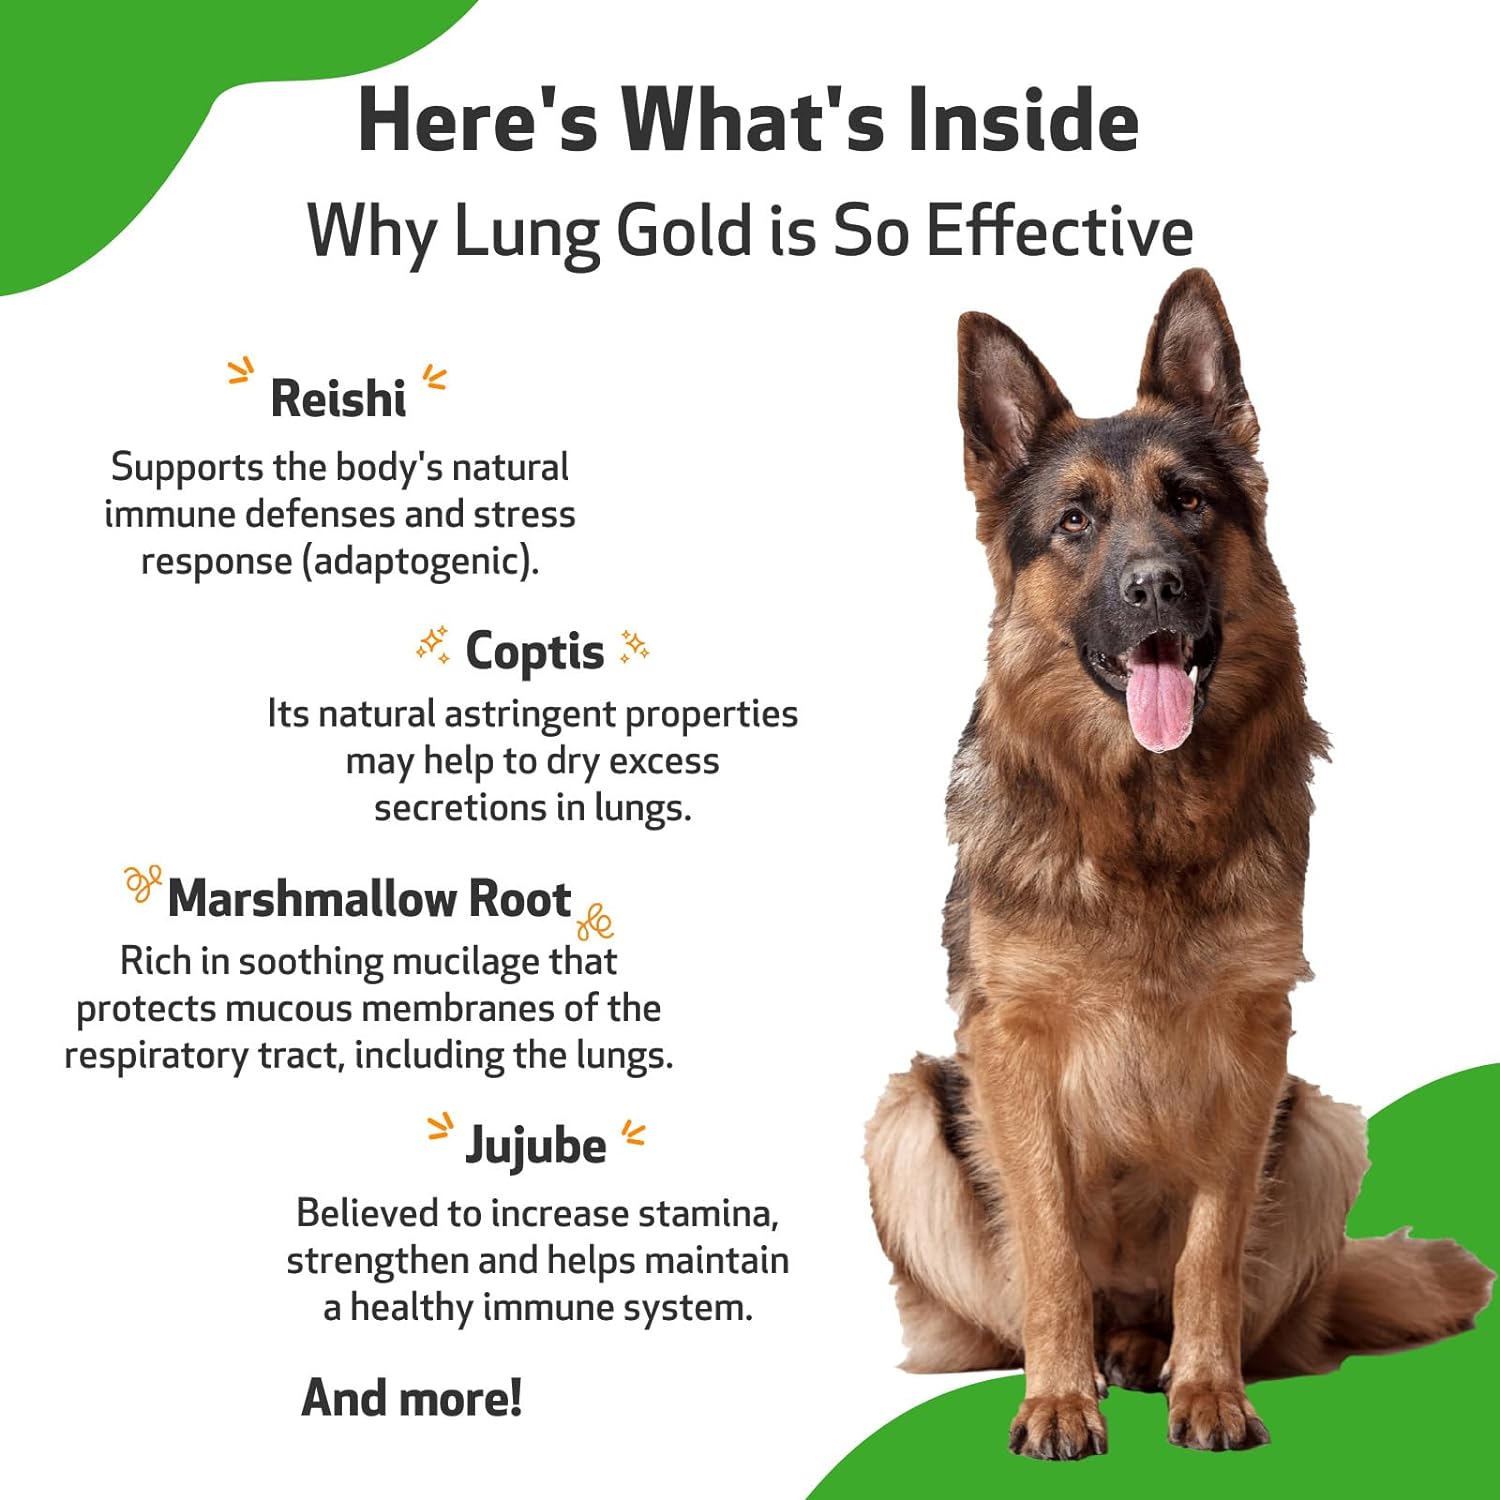 Pet Wellbeing Lung Gold for Dogs - Vet-Formulated - Lung & Respiratory Immune Support, Open Airways, Easy Breathing - Natural Herbal Supplement 2 oz (59 ml) : Pet Supplies